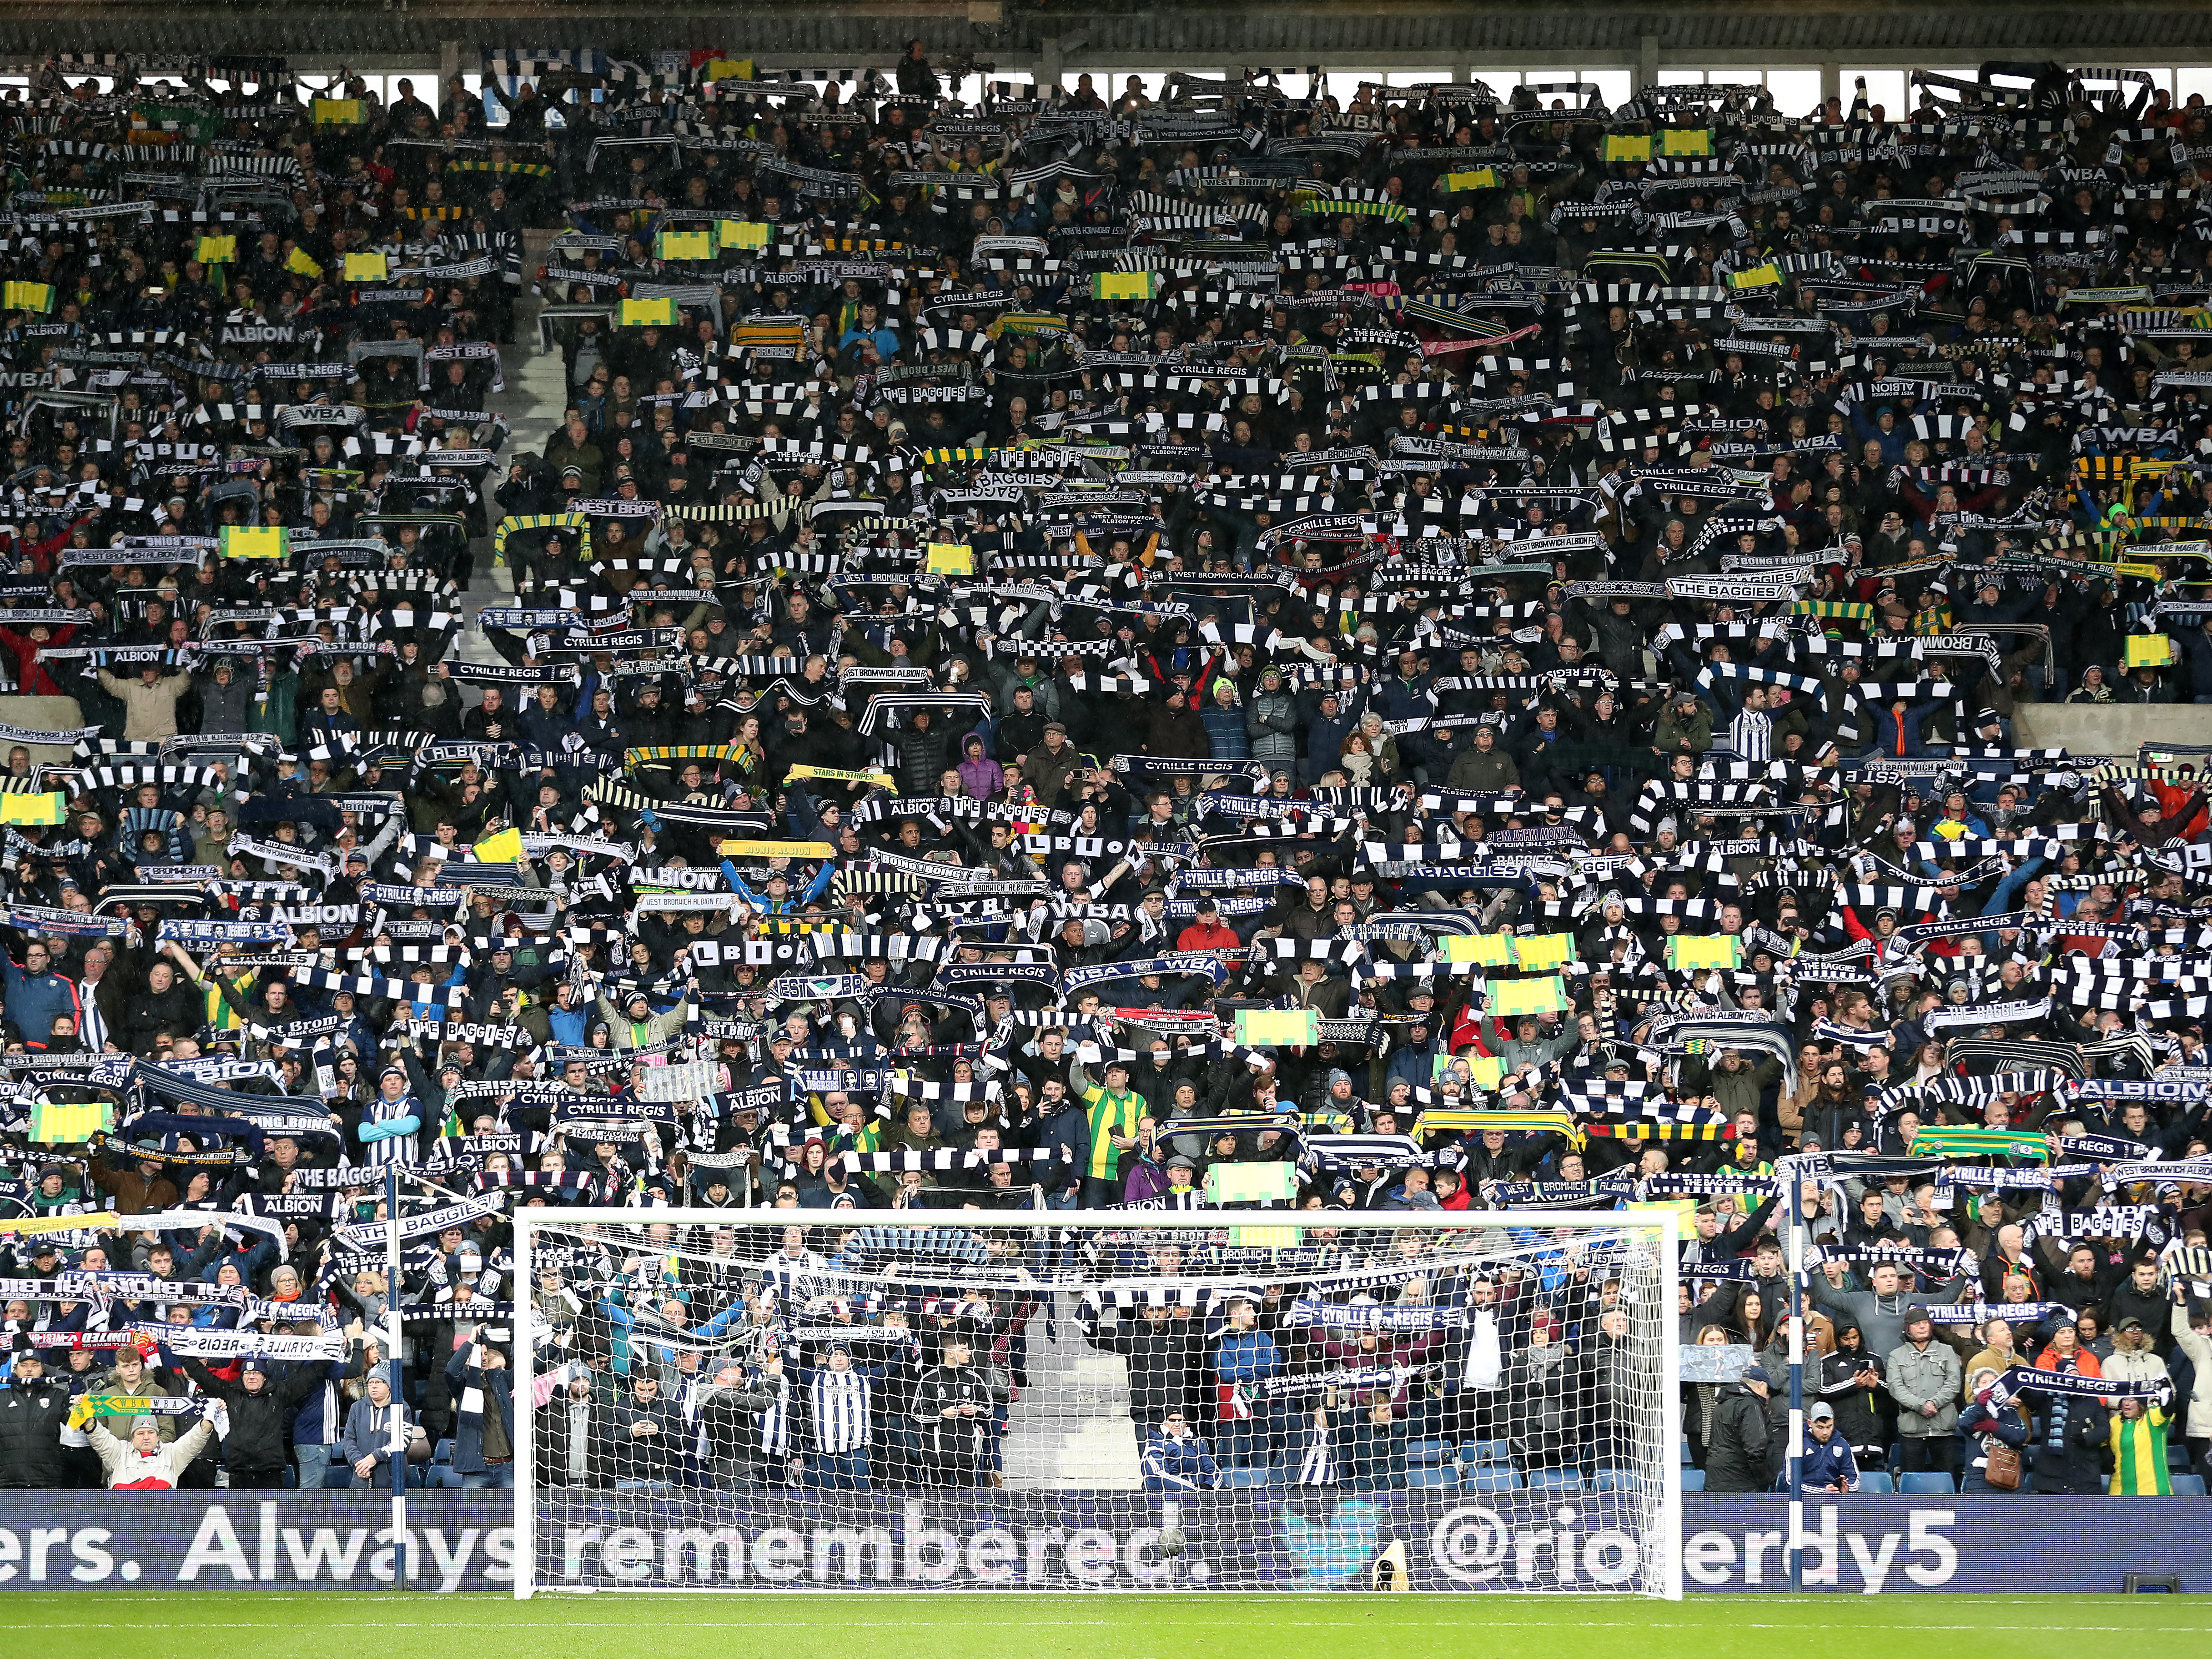 An image of Albion supporters raising their scarfs in the Birmingham Road End